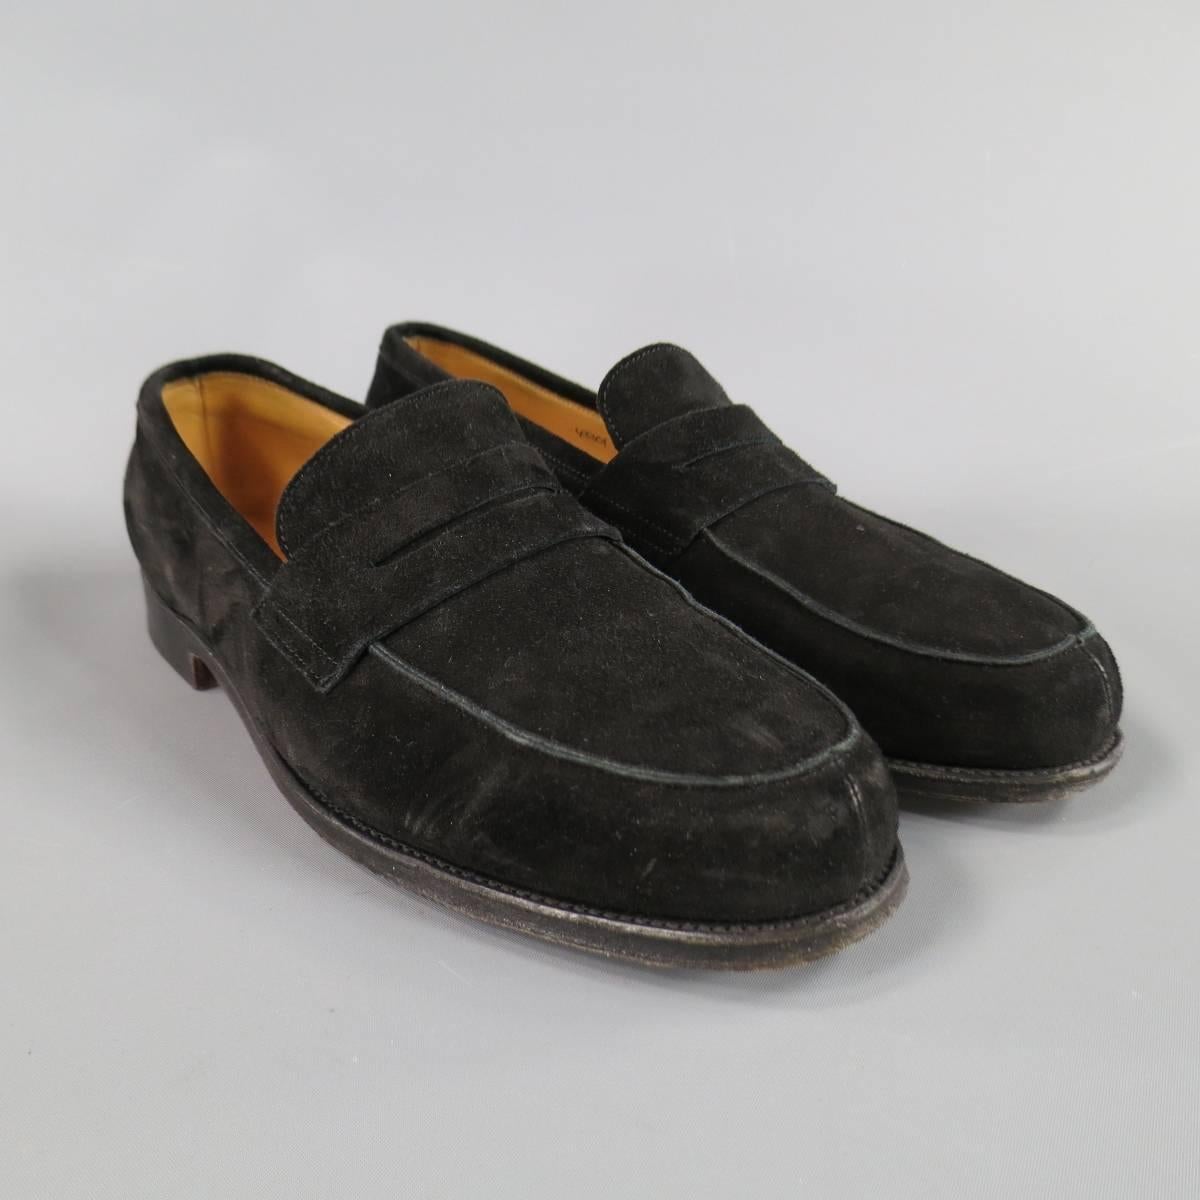 JOHN LOBB "Campus" Loafers consists of suede material in a black color tone. Designed in a round toe seam front, penny loafer vamp and tone-on-tone stitching. Dark leather sole. Made in Italy.
 
Good Pre-Owned Condition 
Marked Size: 7 1/2